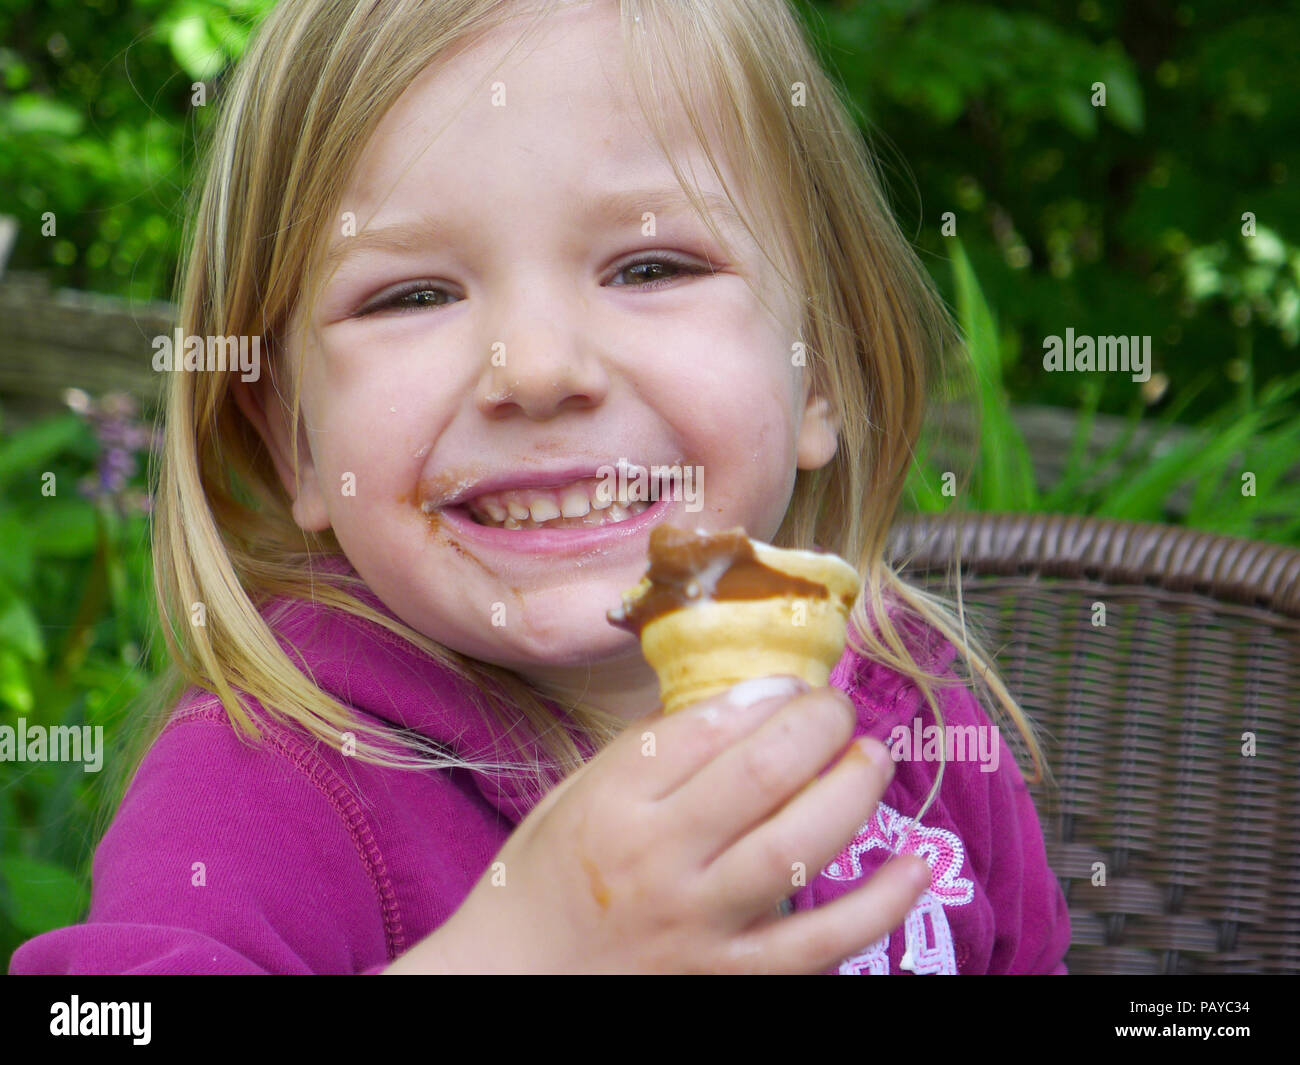 A little girl (3 yr old) eating an ice cream Stock Photo